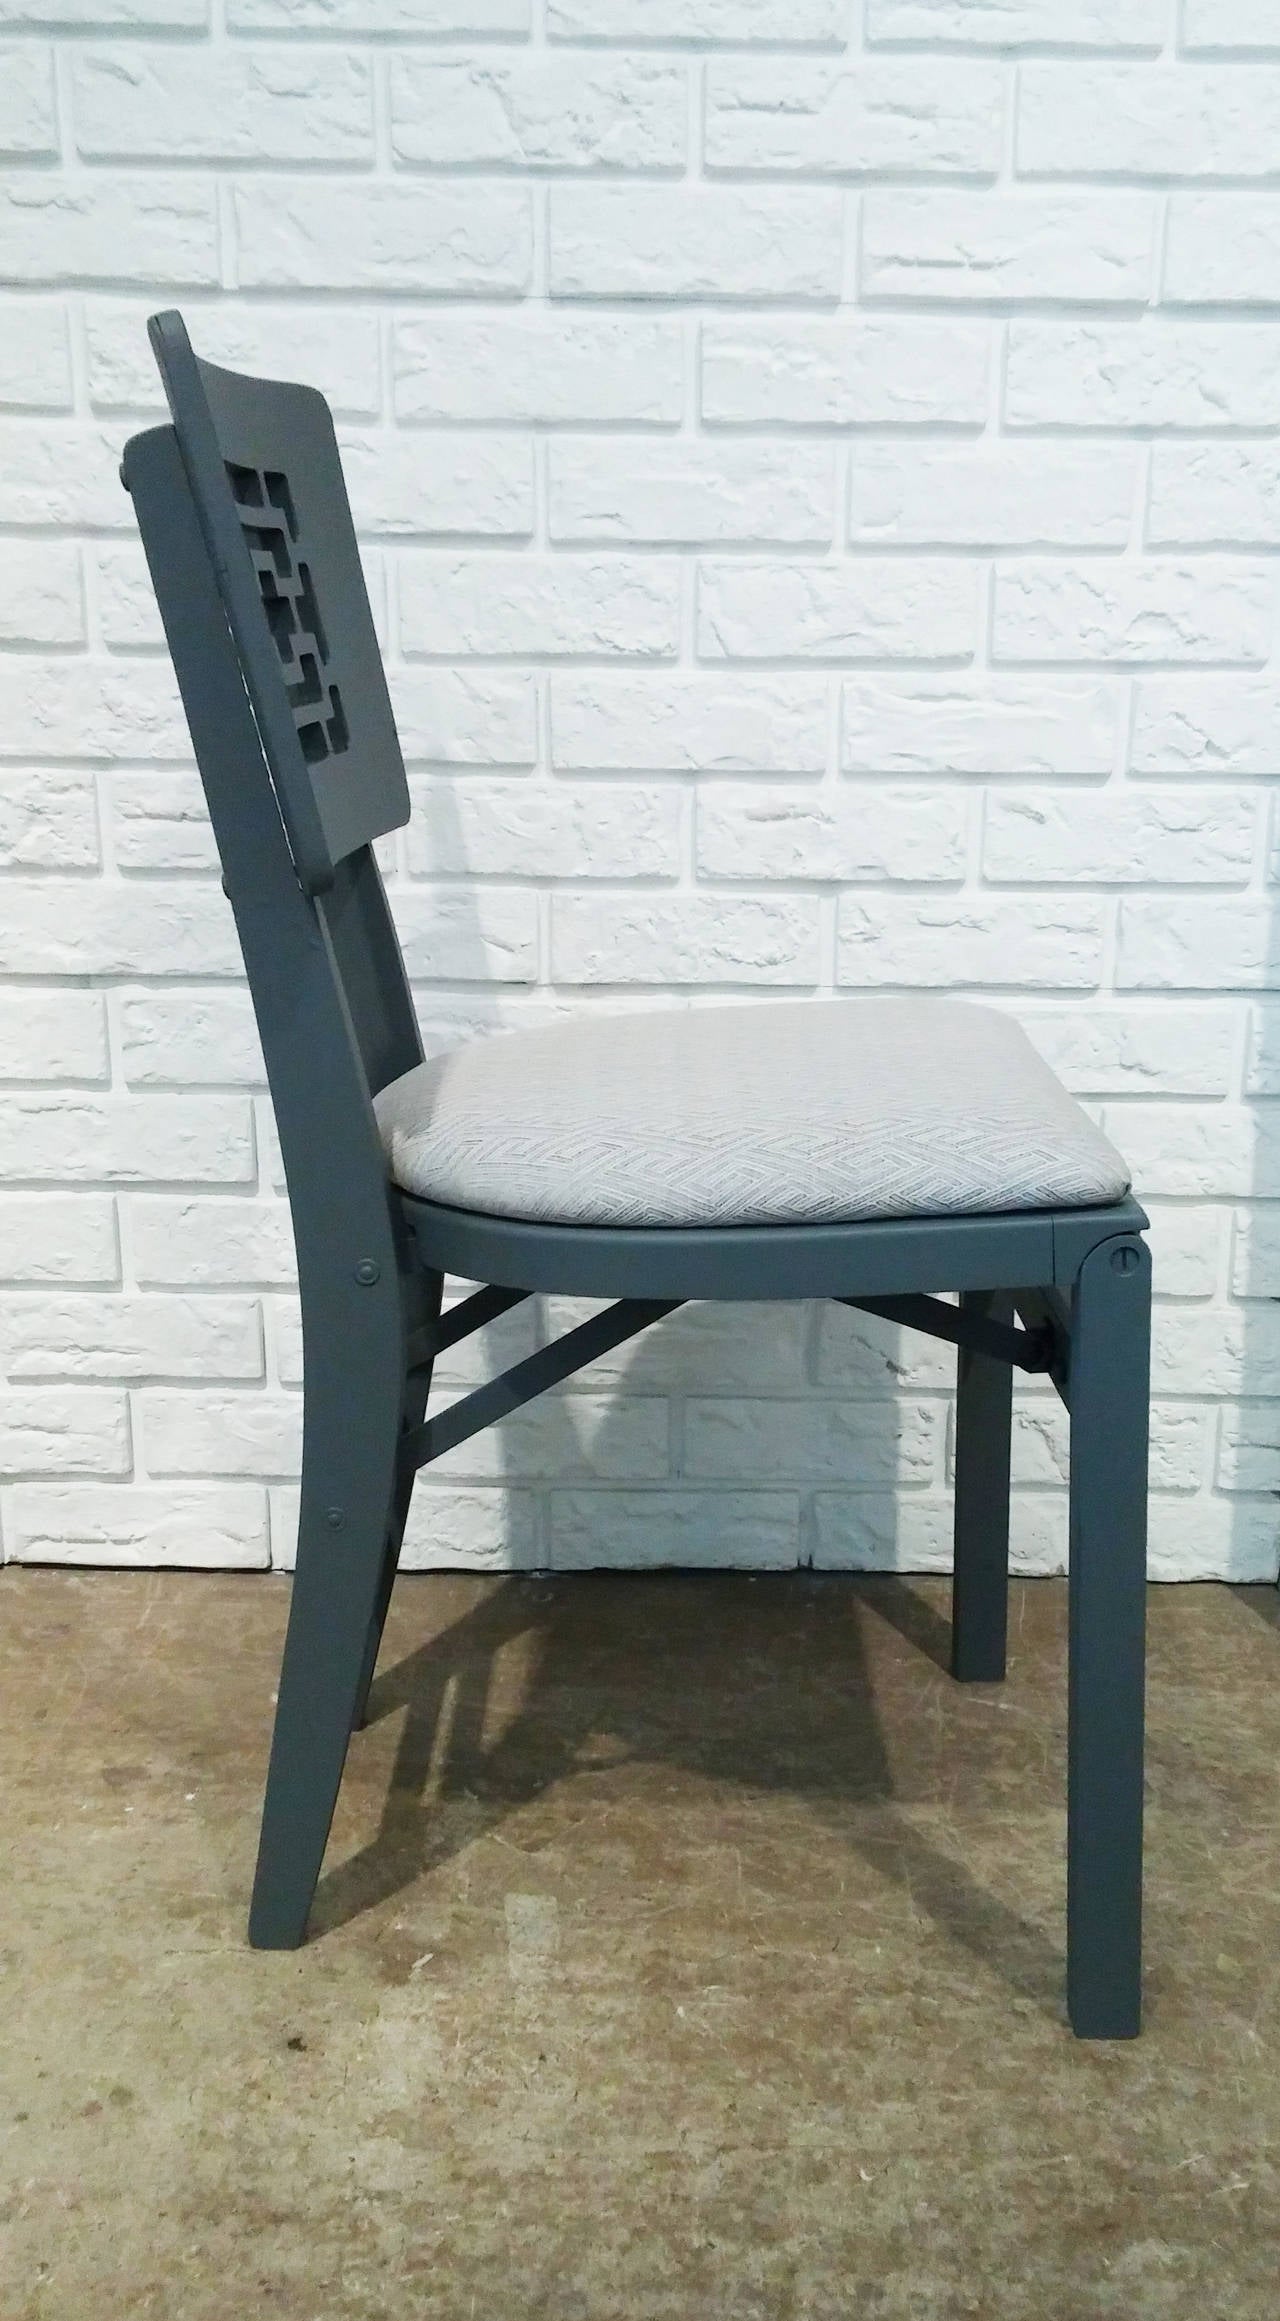 Set of six grey Chinese modern folding chairs with newly upholstered seats.